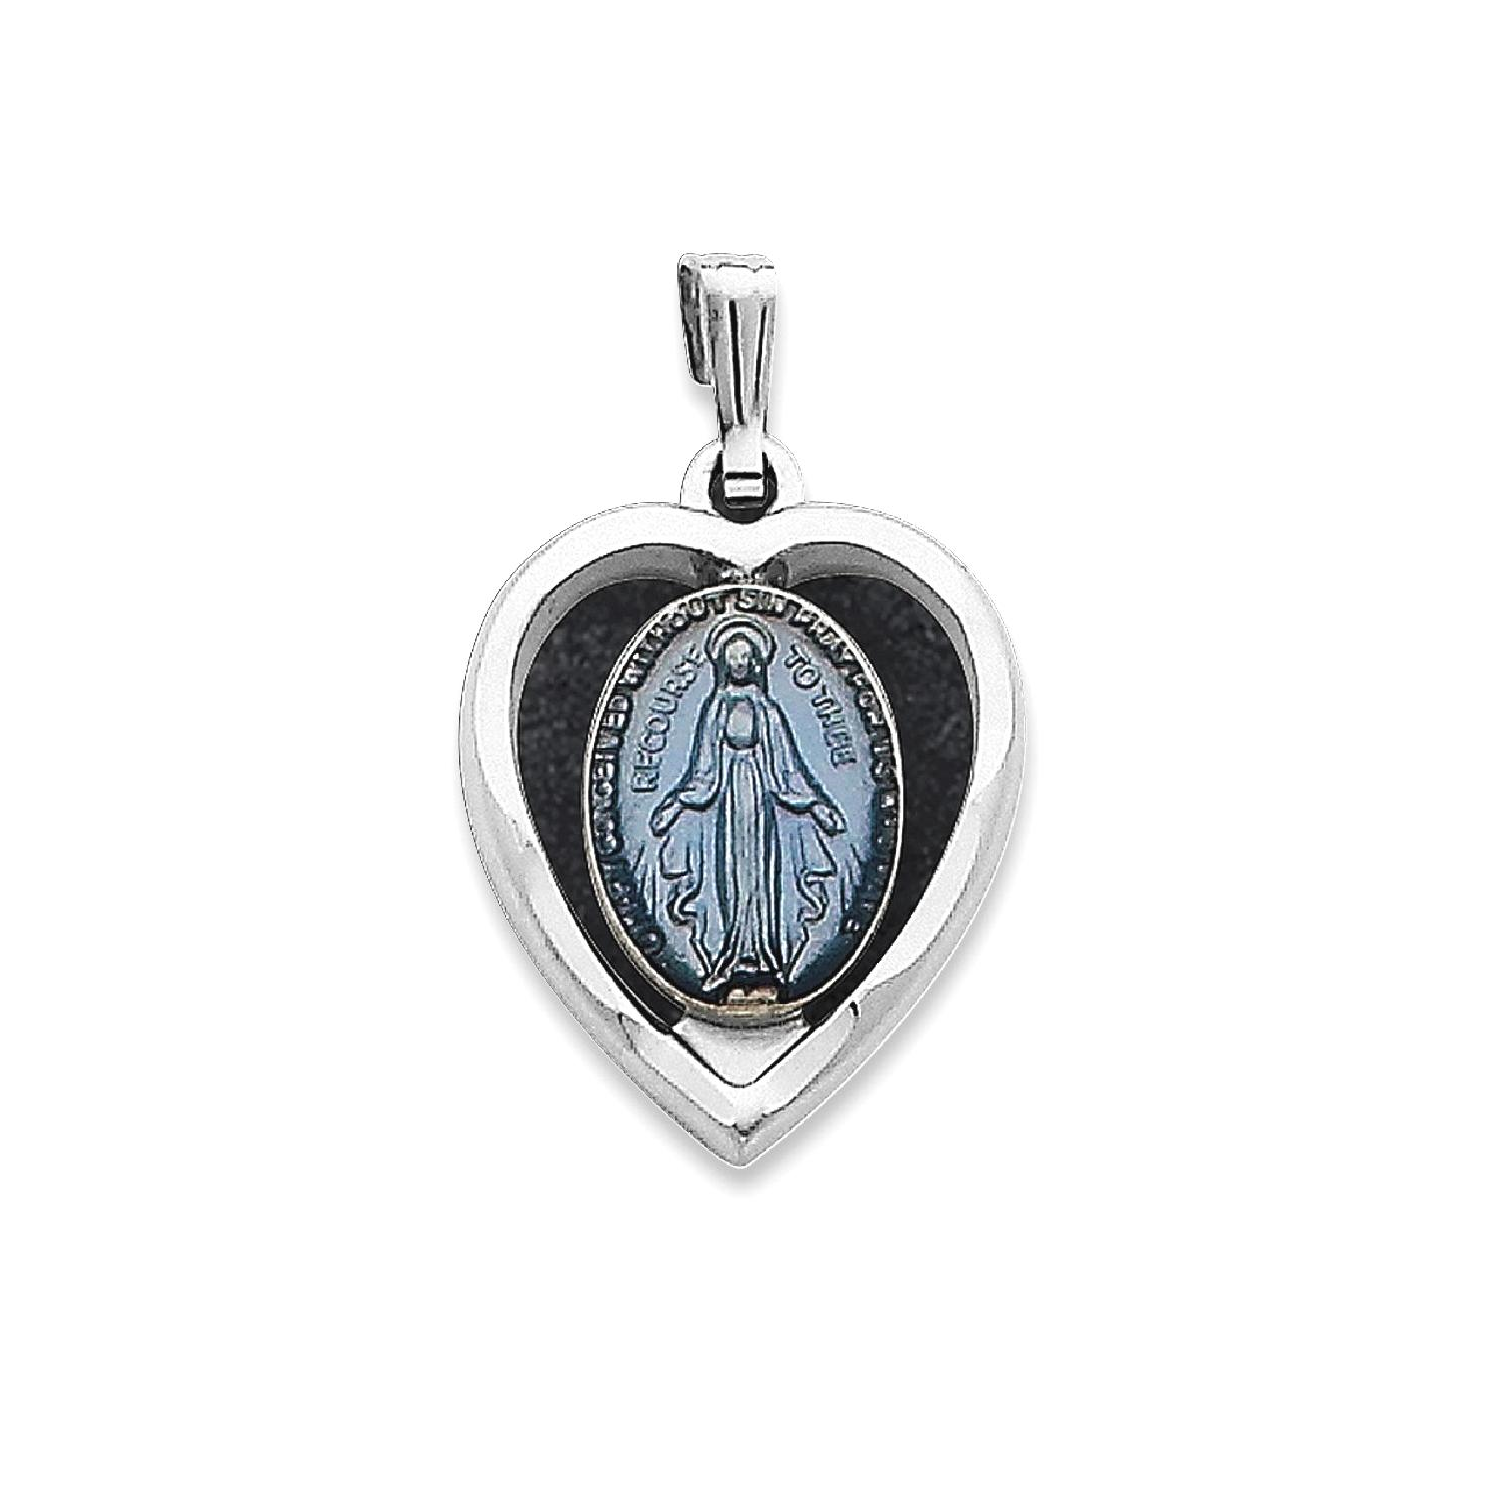 IceCarats 925 Sterling Silver Miraculous Heart Medal Pendant Charm Necklace Religious Miraculou